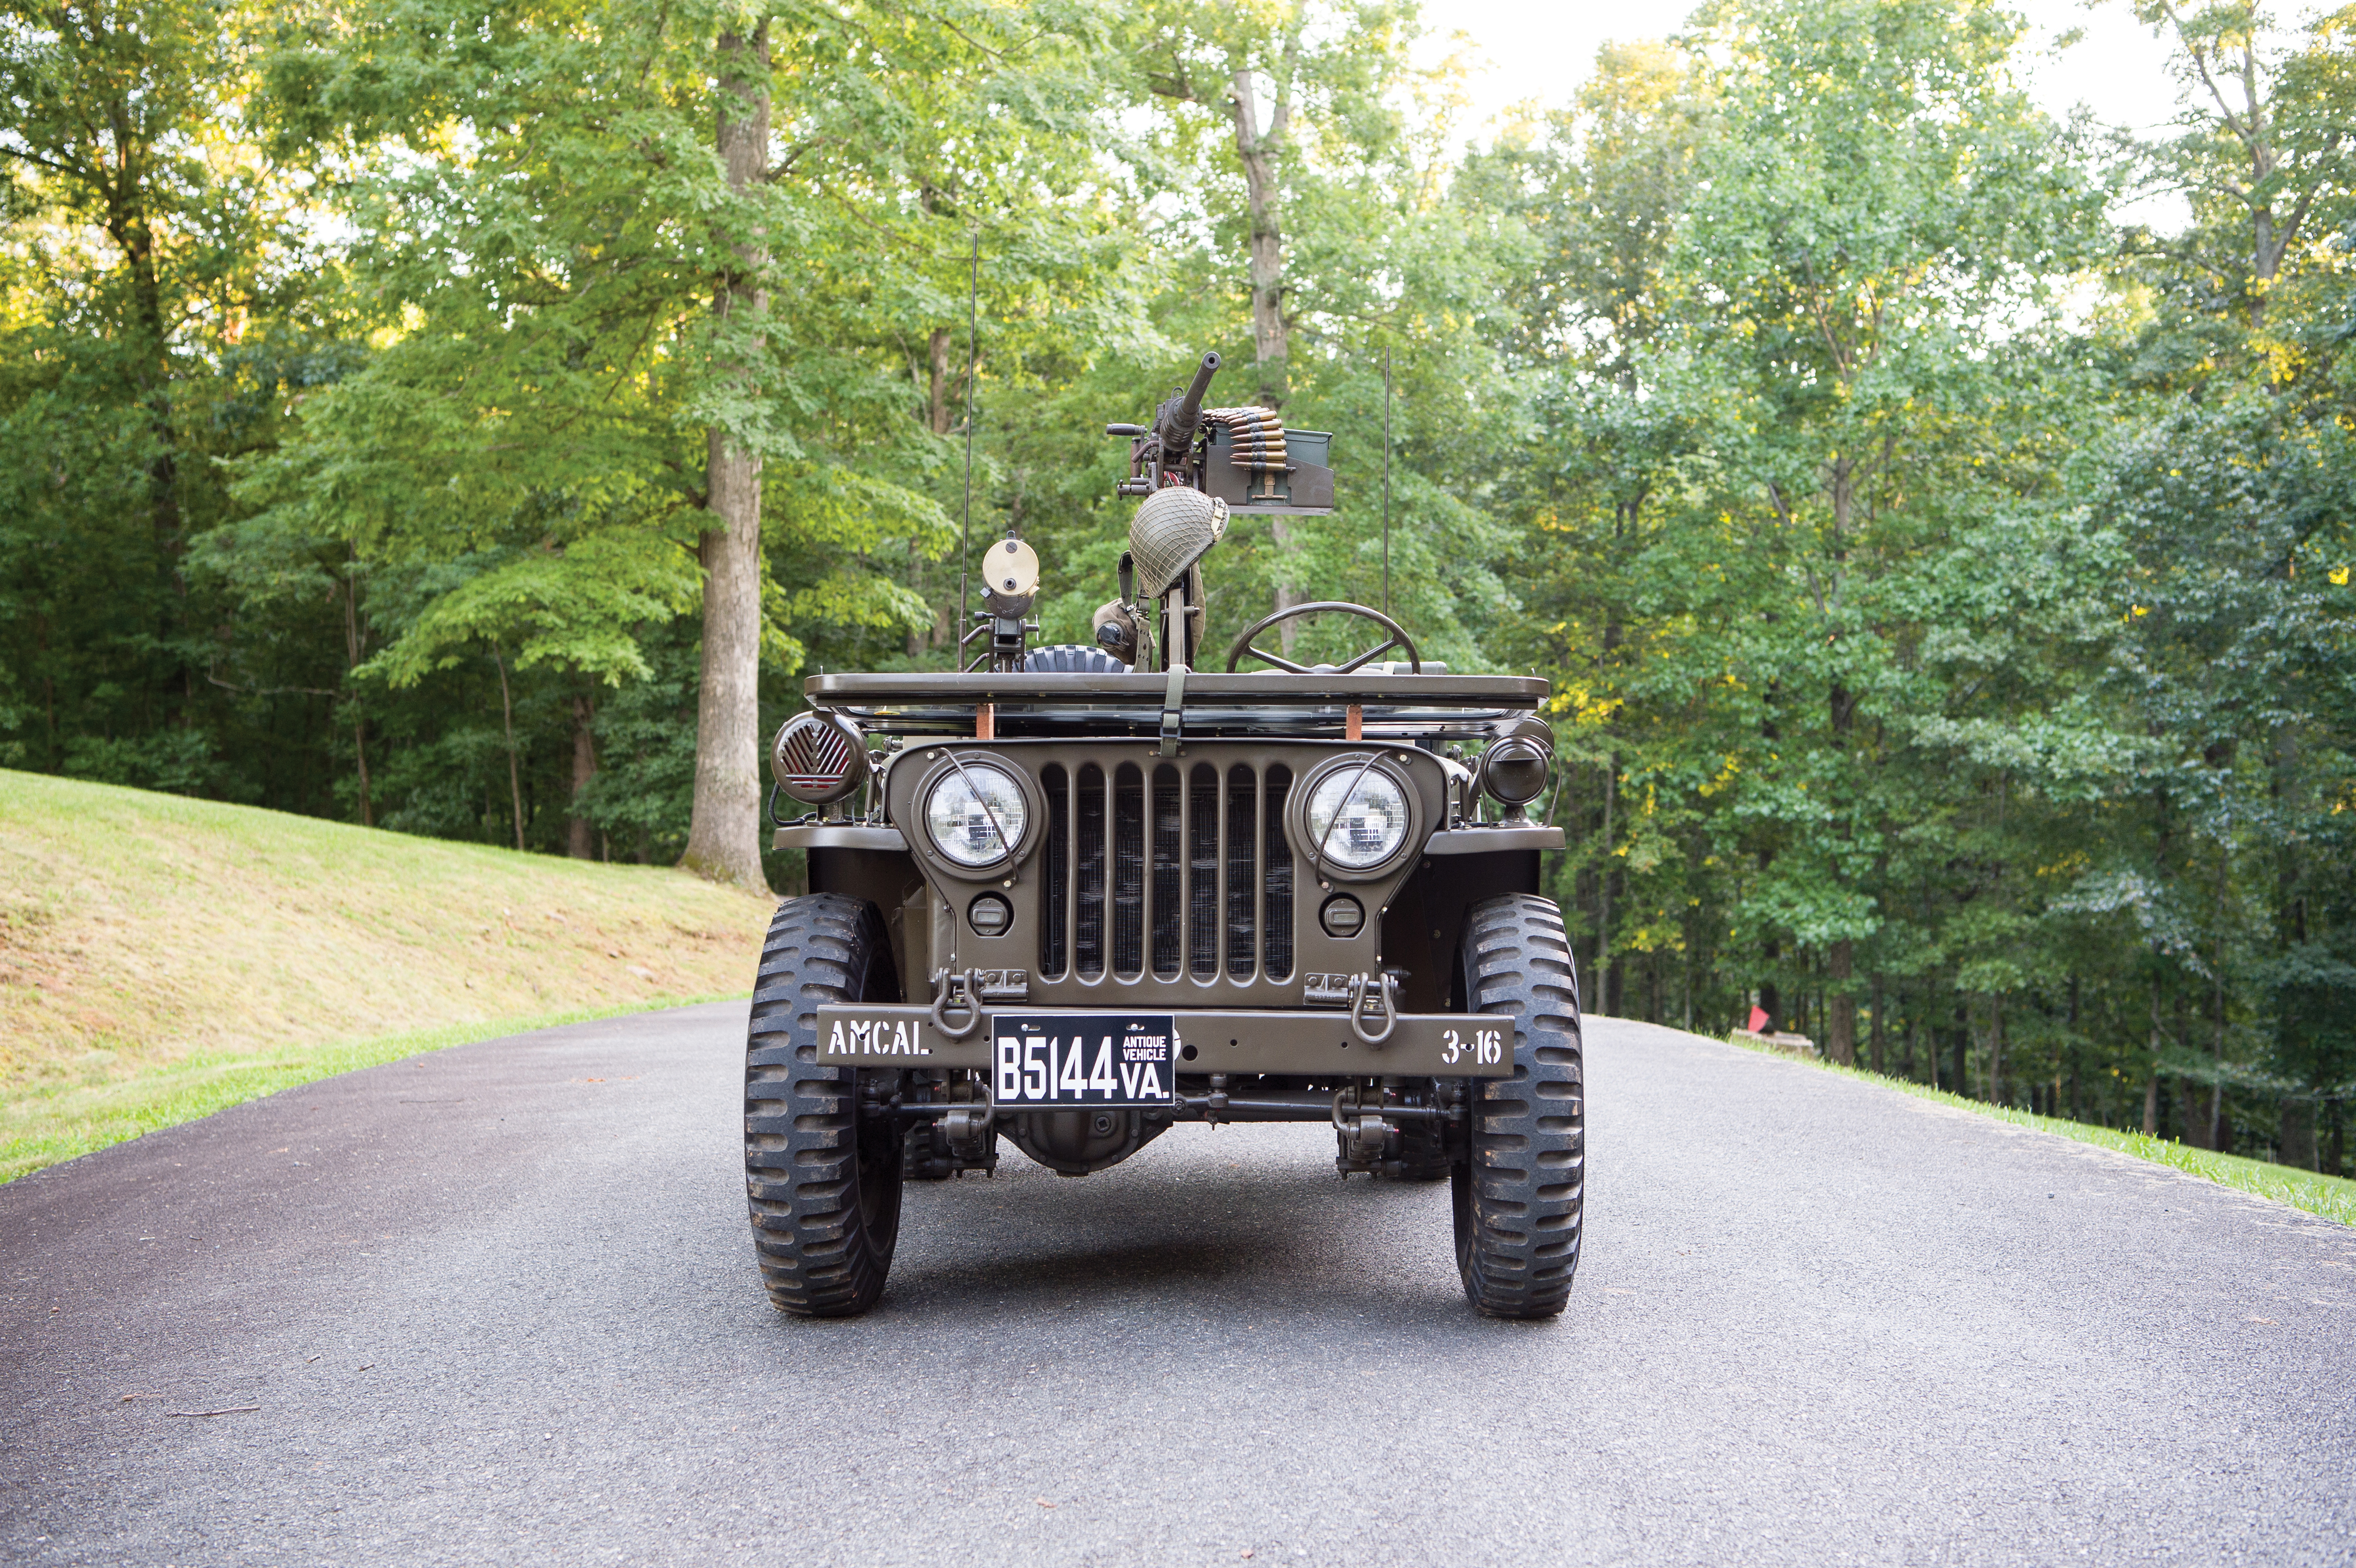 1952 willys-overland m38a1 1/4 ton